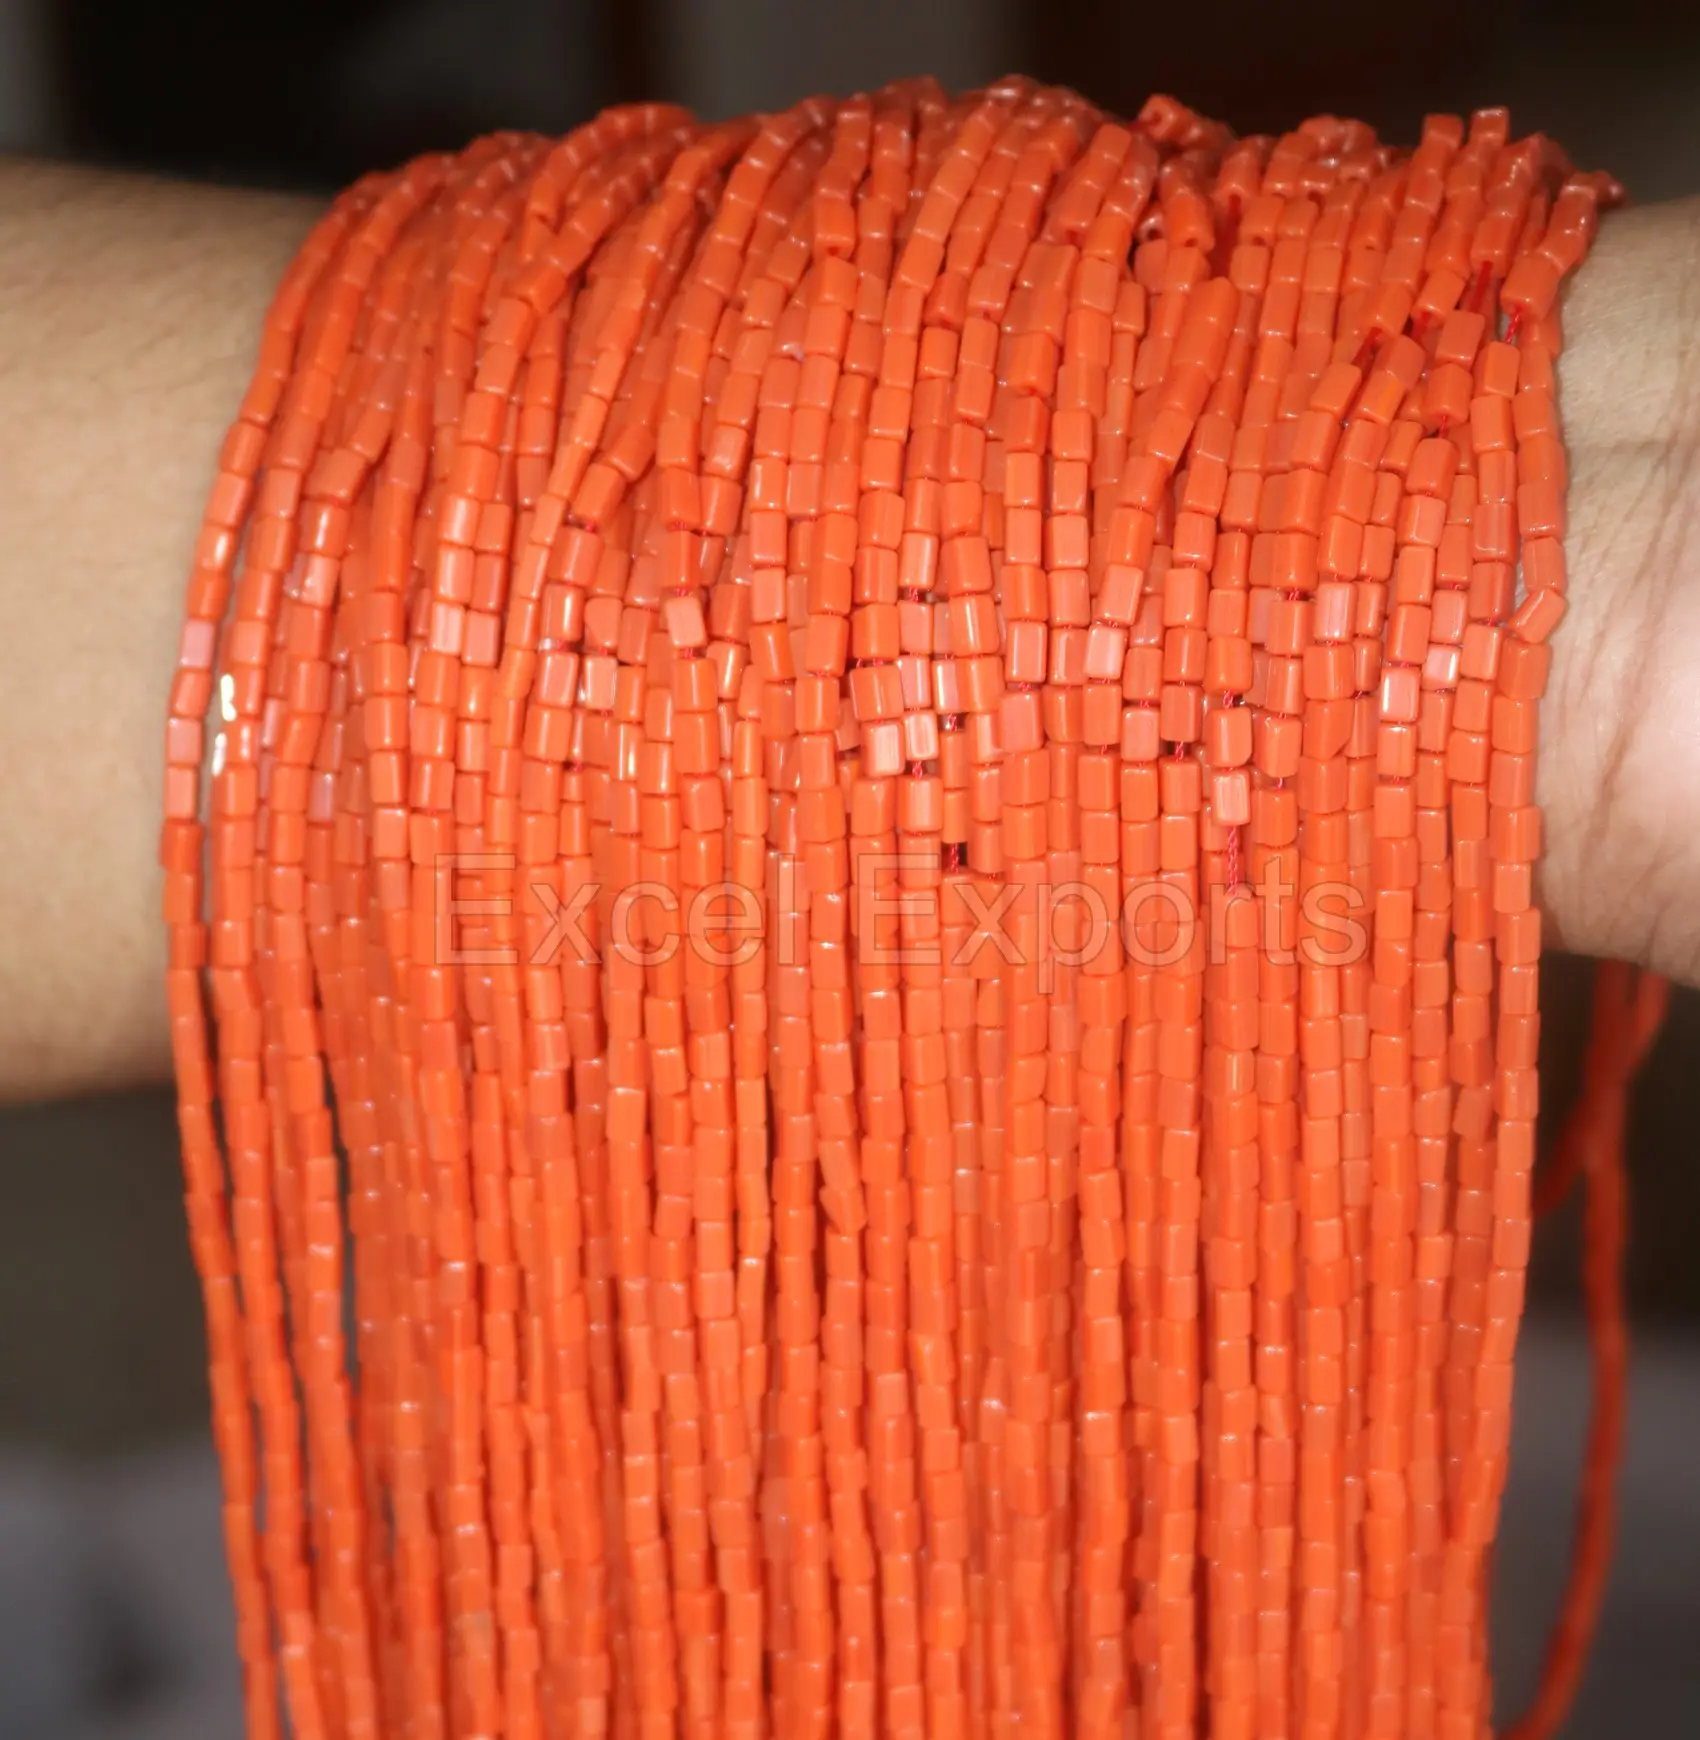 2023 Top selling coral glass beads 3mm 4mm square tube cube beads for jewelry making loose beads on strand.